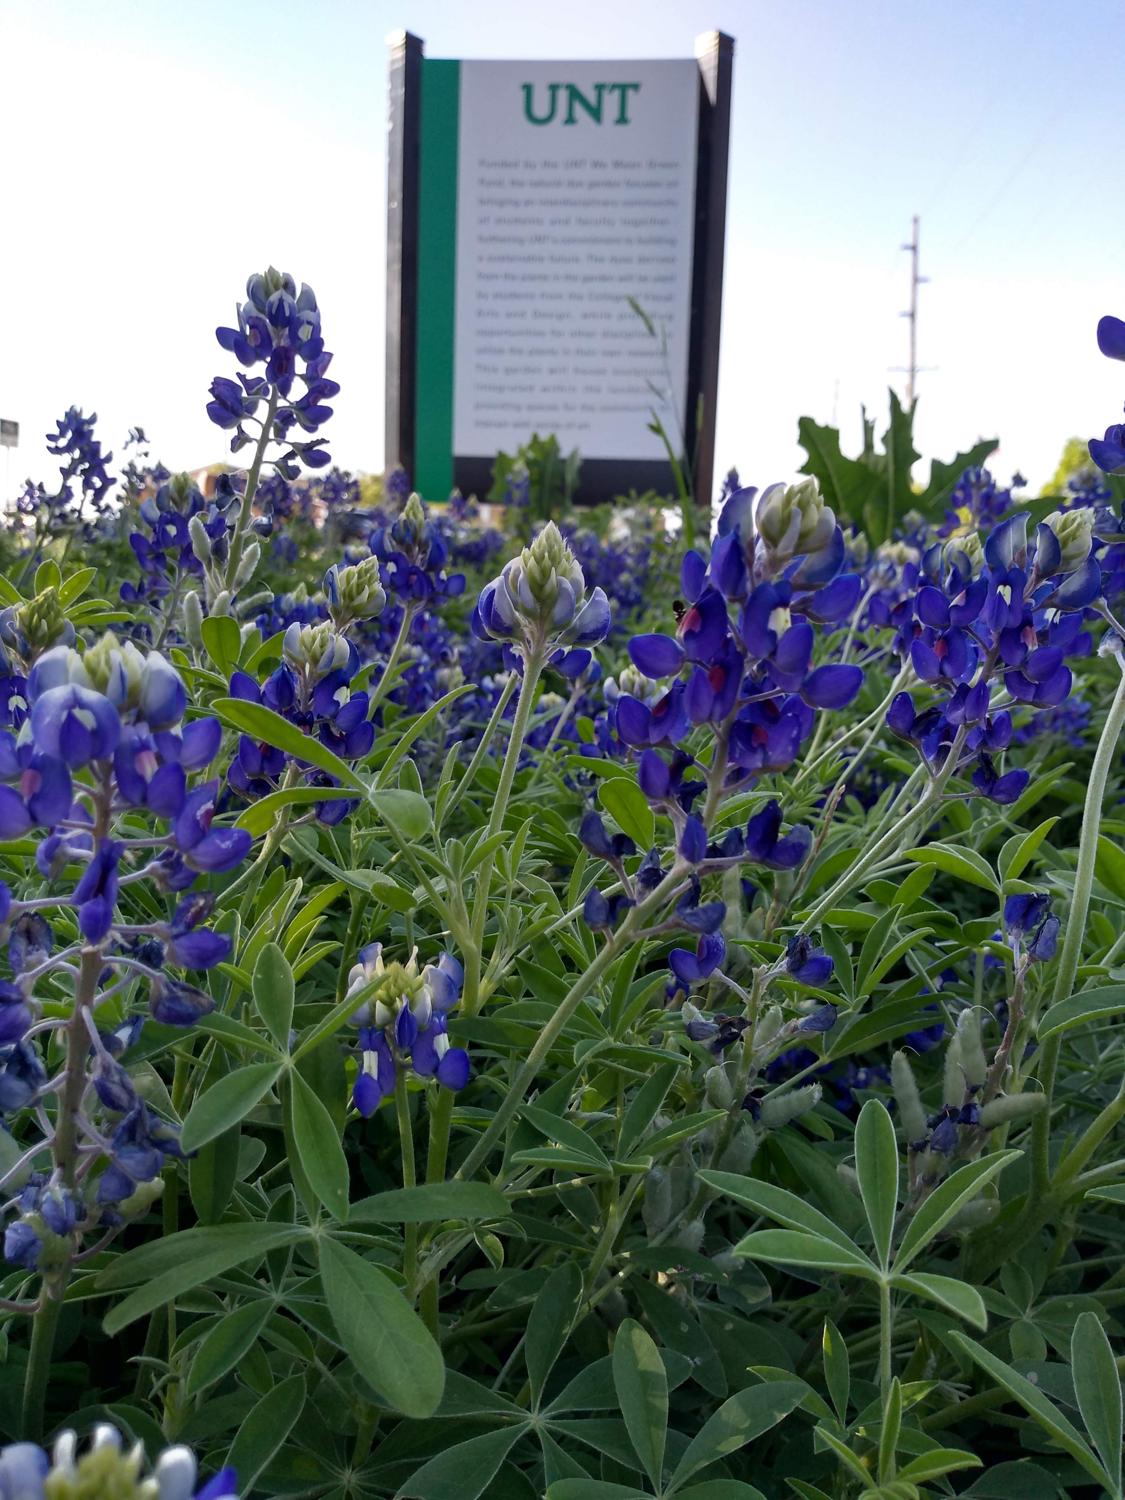 The Natural Dye Garden sign surrounded by bluebonnets